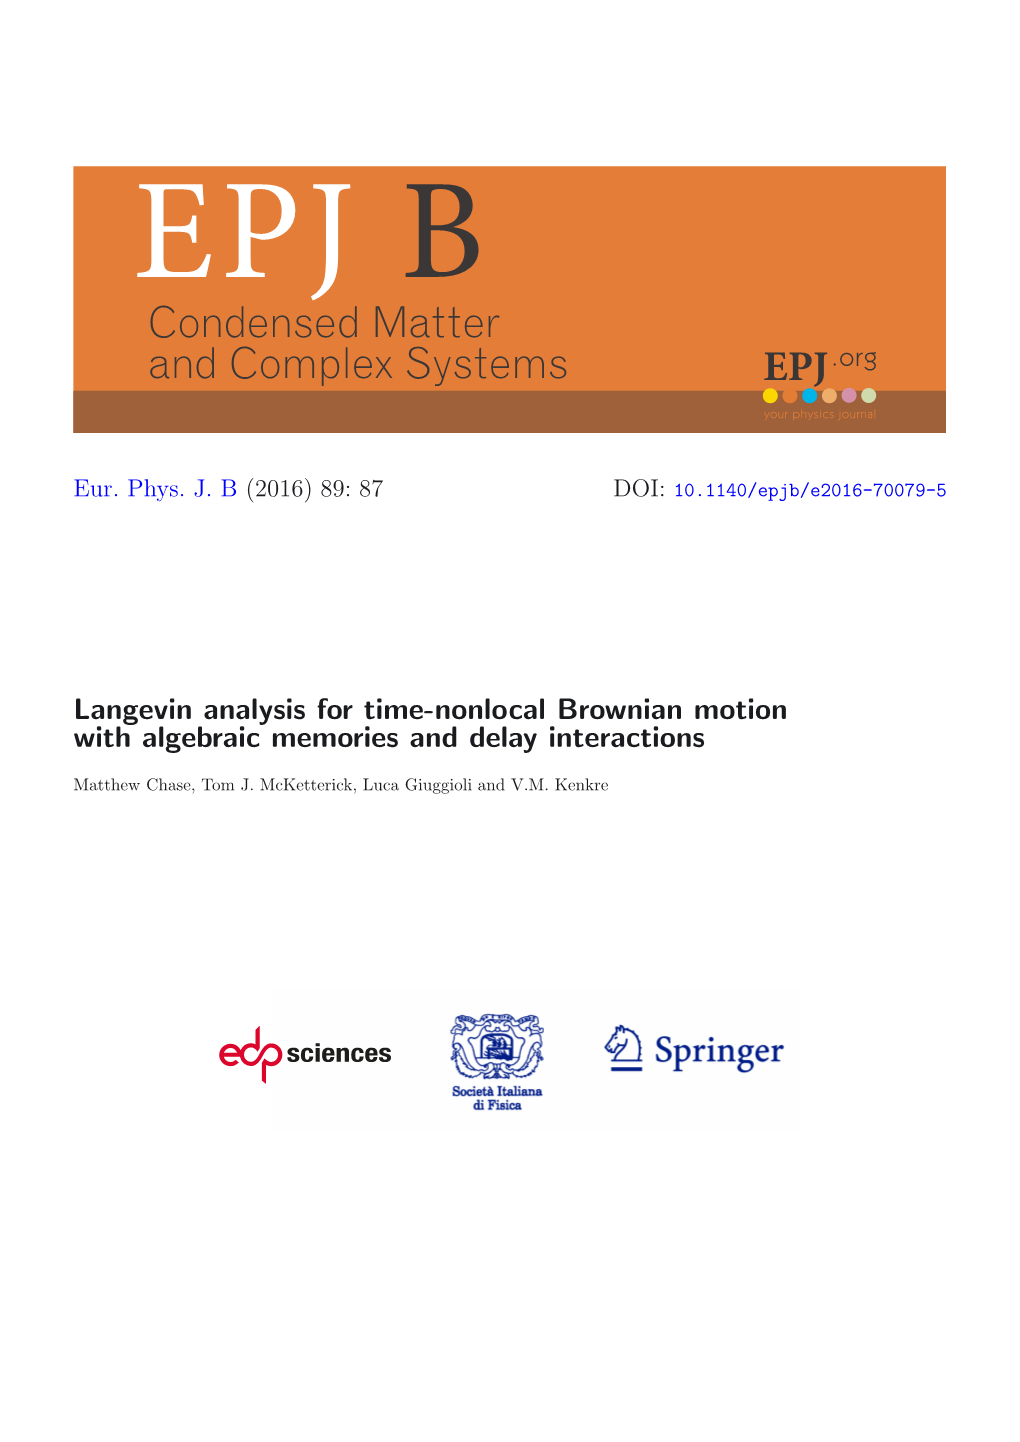 Langevin Analysis for Time-Nonlocal Brownian Motion with Algebraic Memories and Delay Interactions